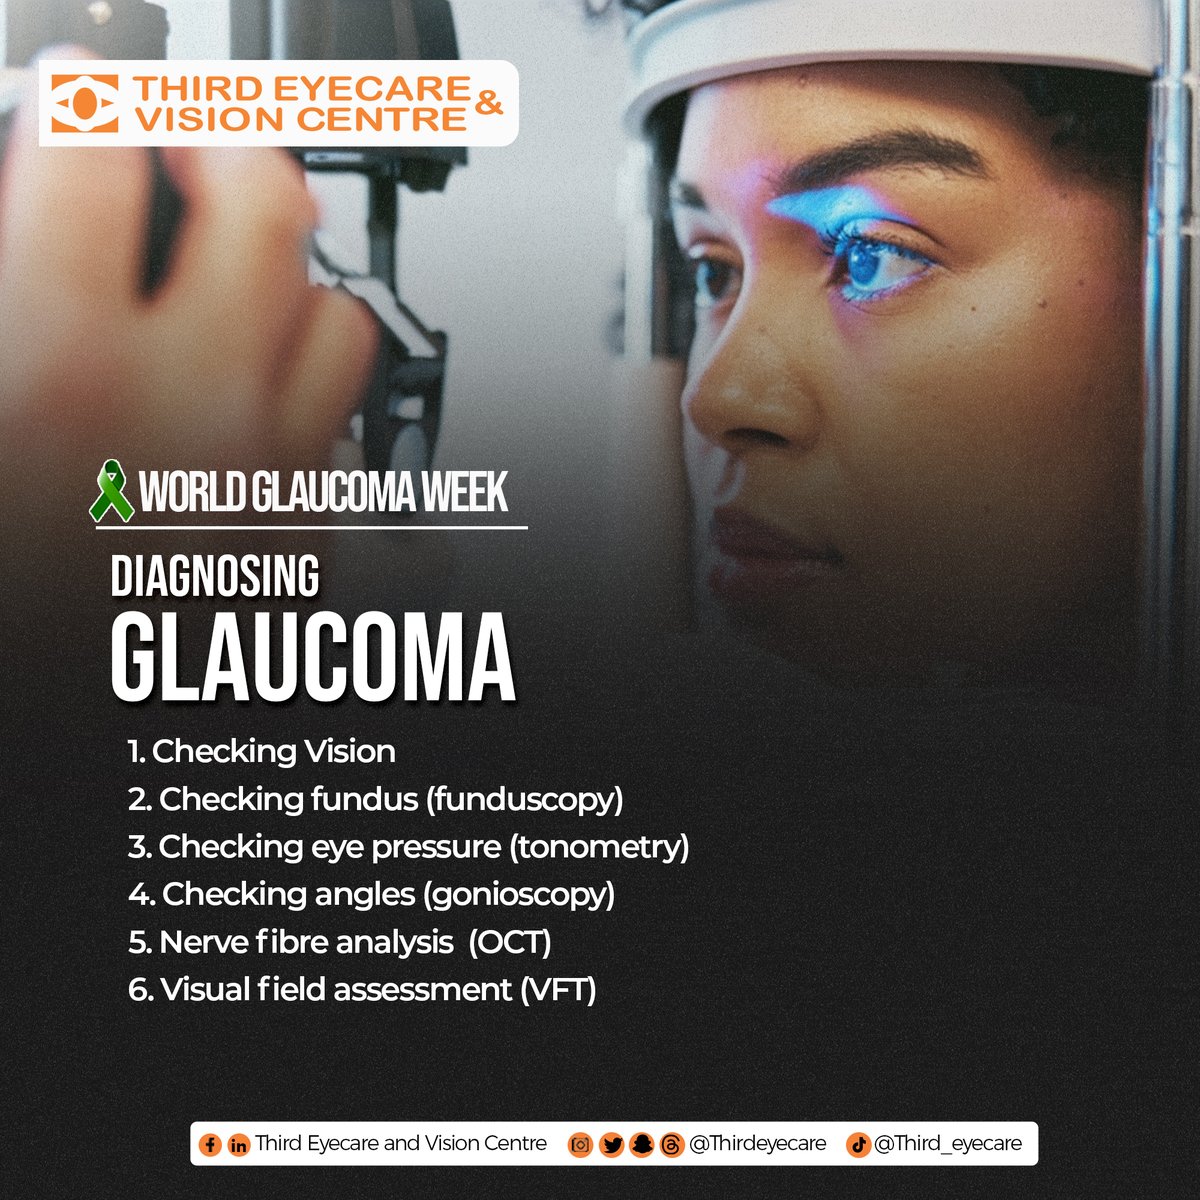 Shining a light on awareness during World Glaucoma Week. Your vision matters, and so does early detection. Join us in spreading awareness and promoting eye health. Together, let's beat the silent thief of sight. #thirdeyecare #Eyeexam #WorldGlaucomaWeek #EyeHealthMatters 👁️💙